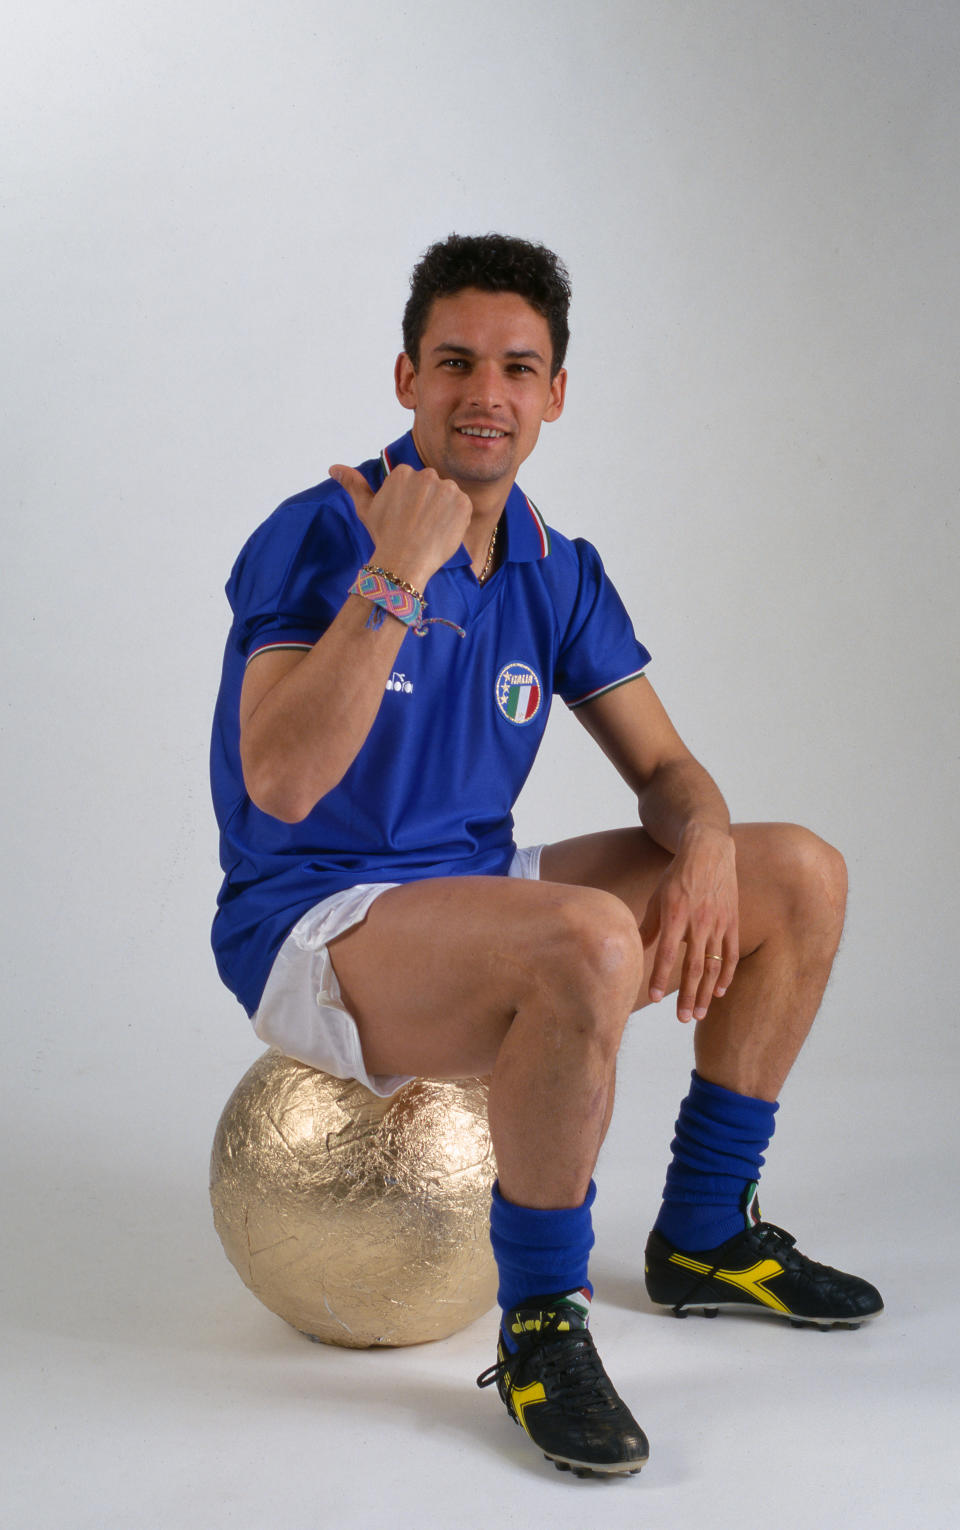 ITALY : Juventus player Roberto Baggio on a portrait session with Italia team kit on 1994 in Italy. (Photo by Juventus FC - Archive/Juventus FC via Getty Images)